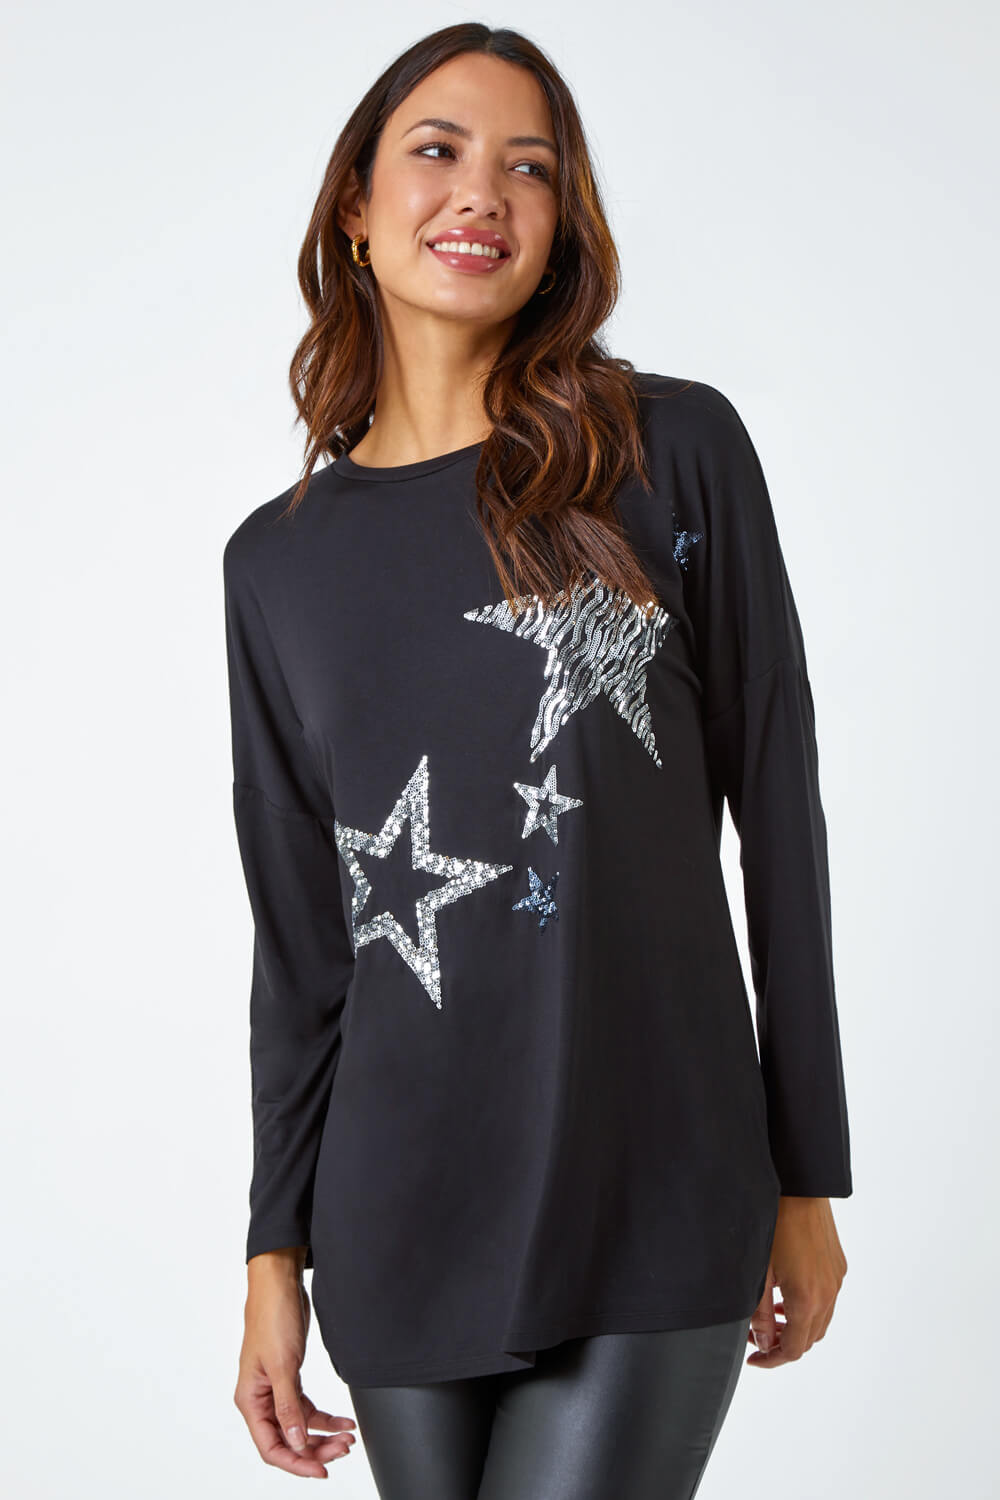 Silver Sequin Star Print Tunic Stretch Top , Image 2 of 5